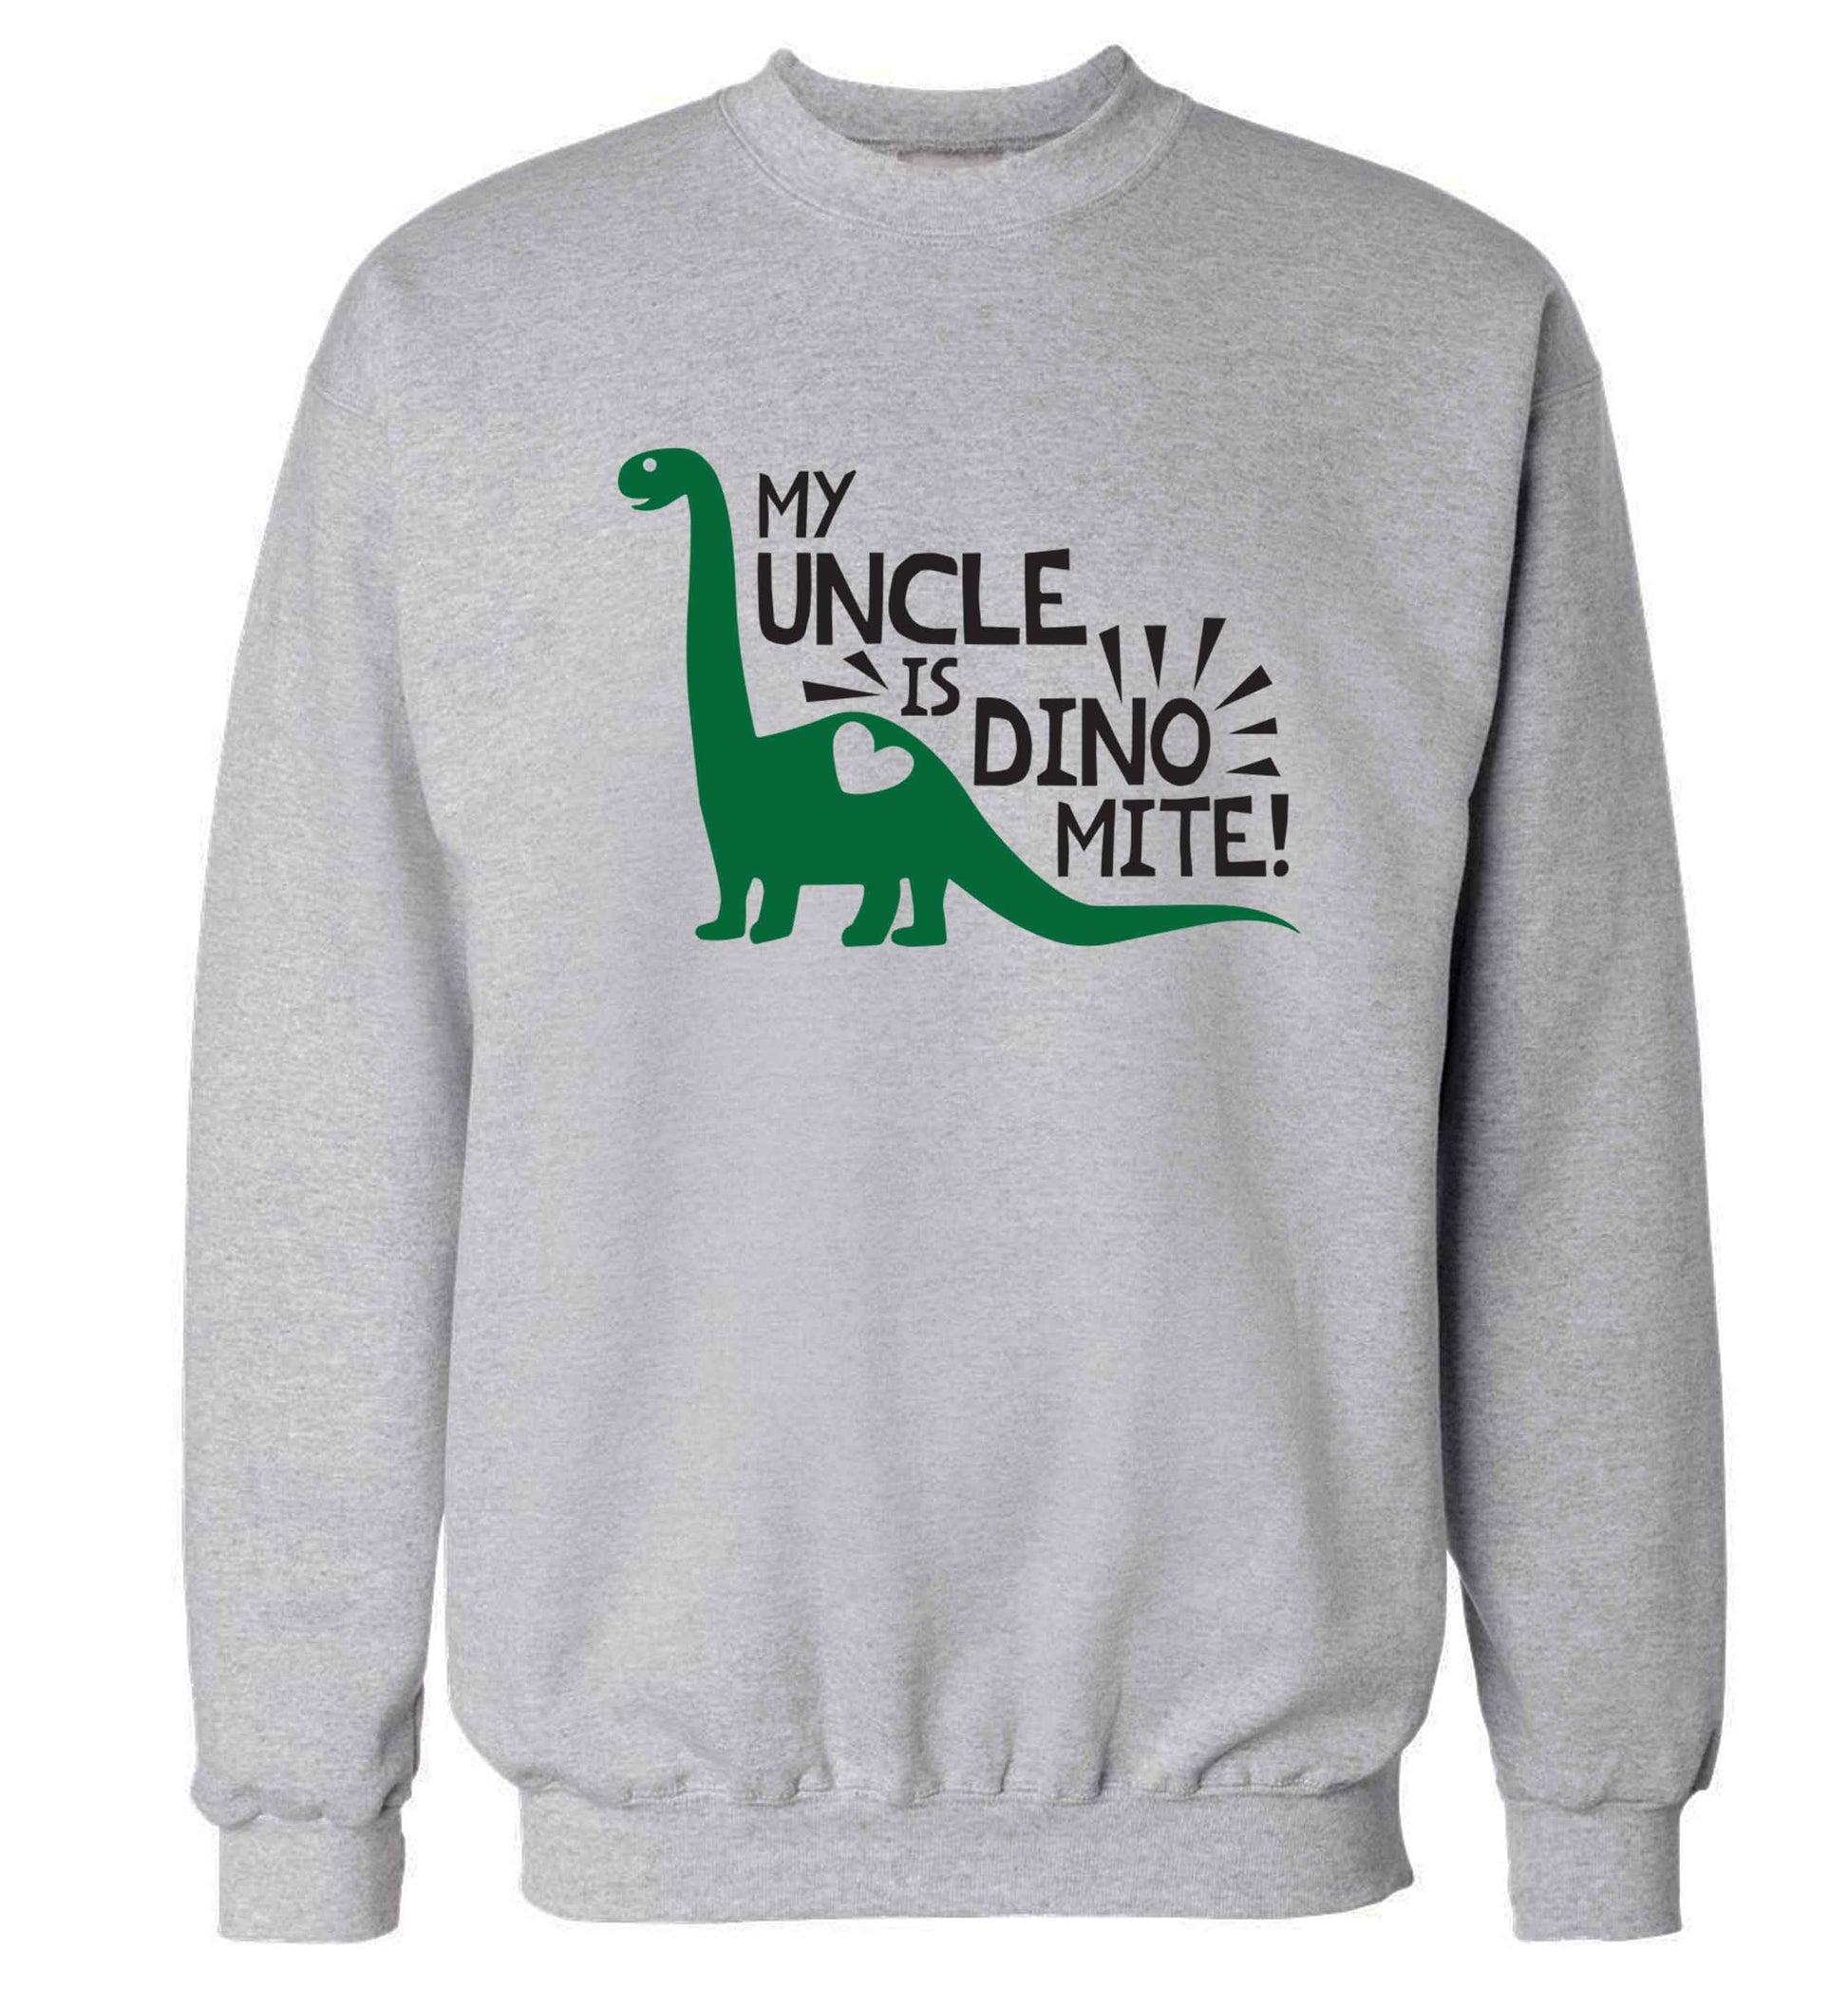 My uncle is dinomite! Adult's unisex grey Sweater 2XL